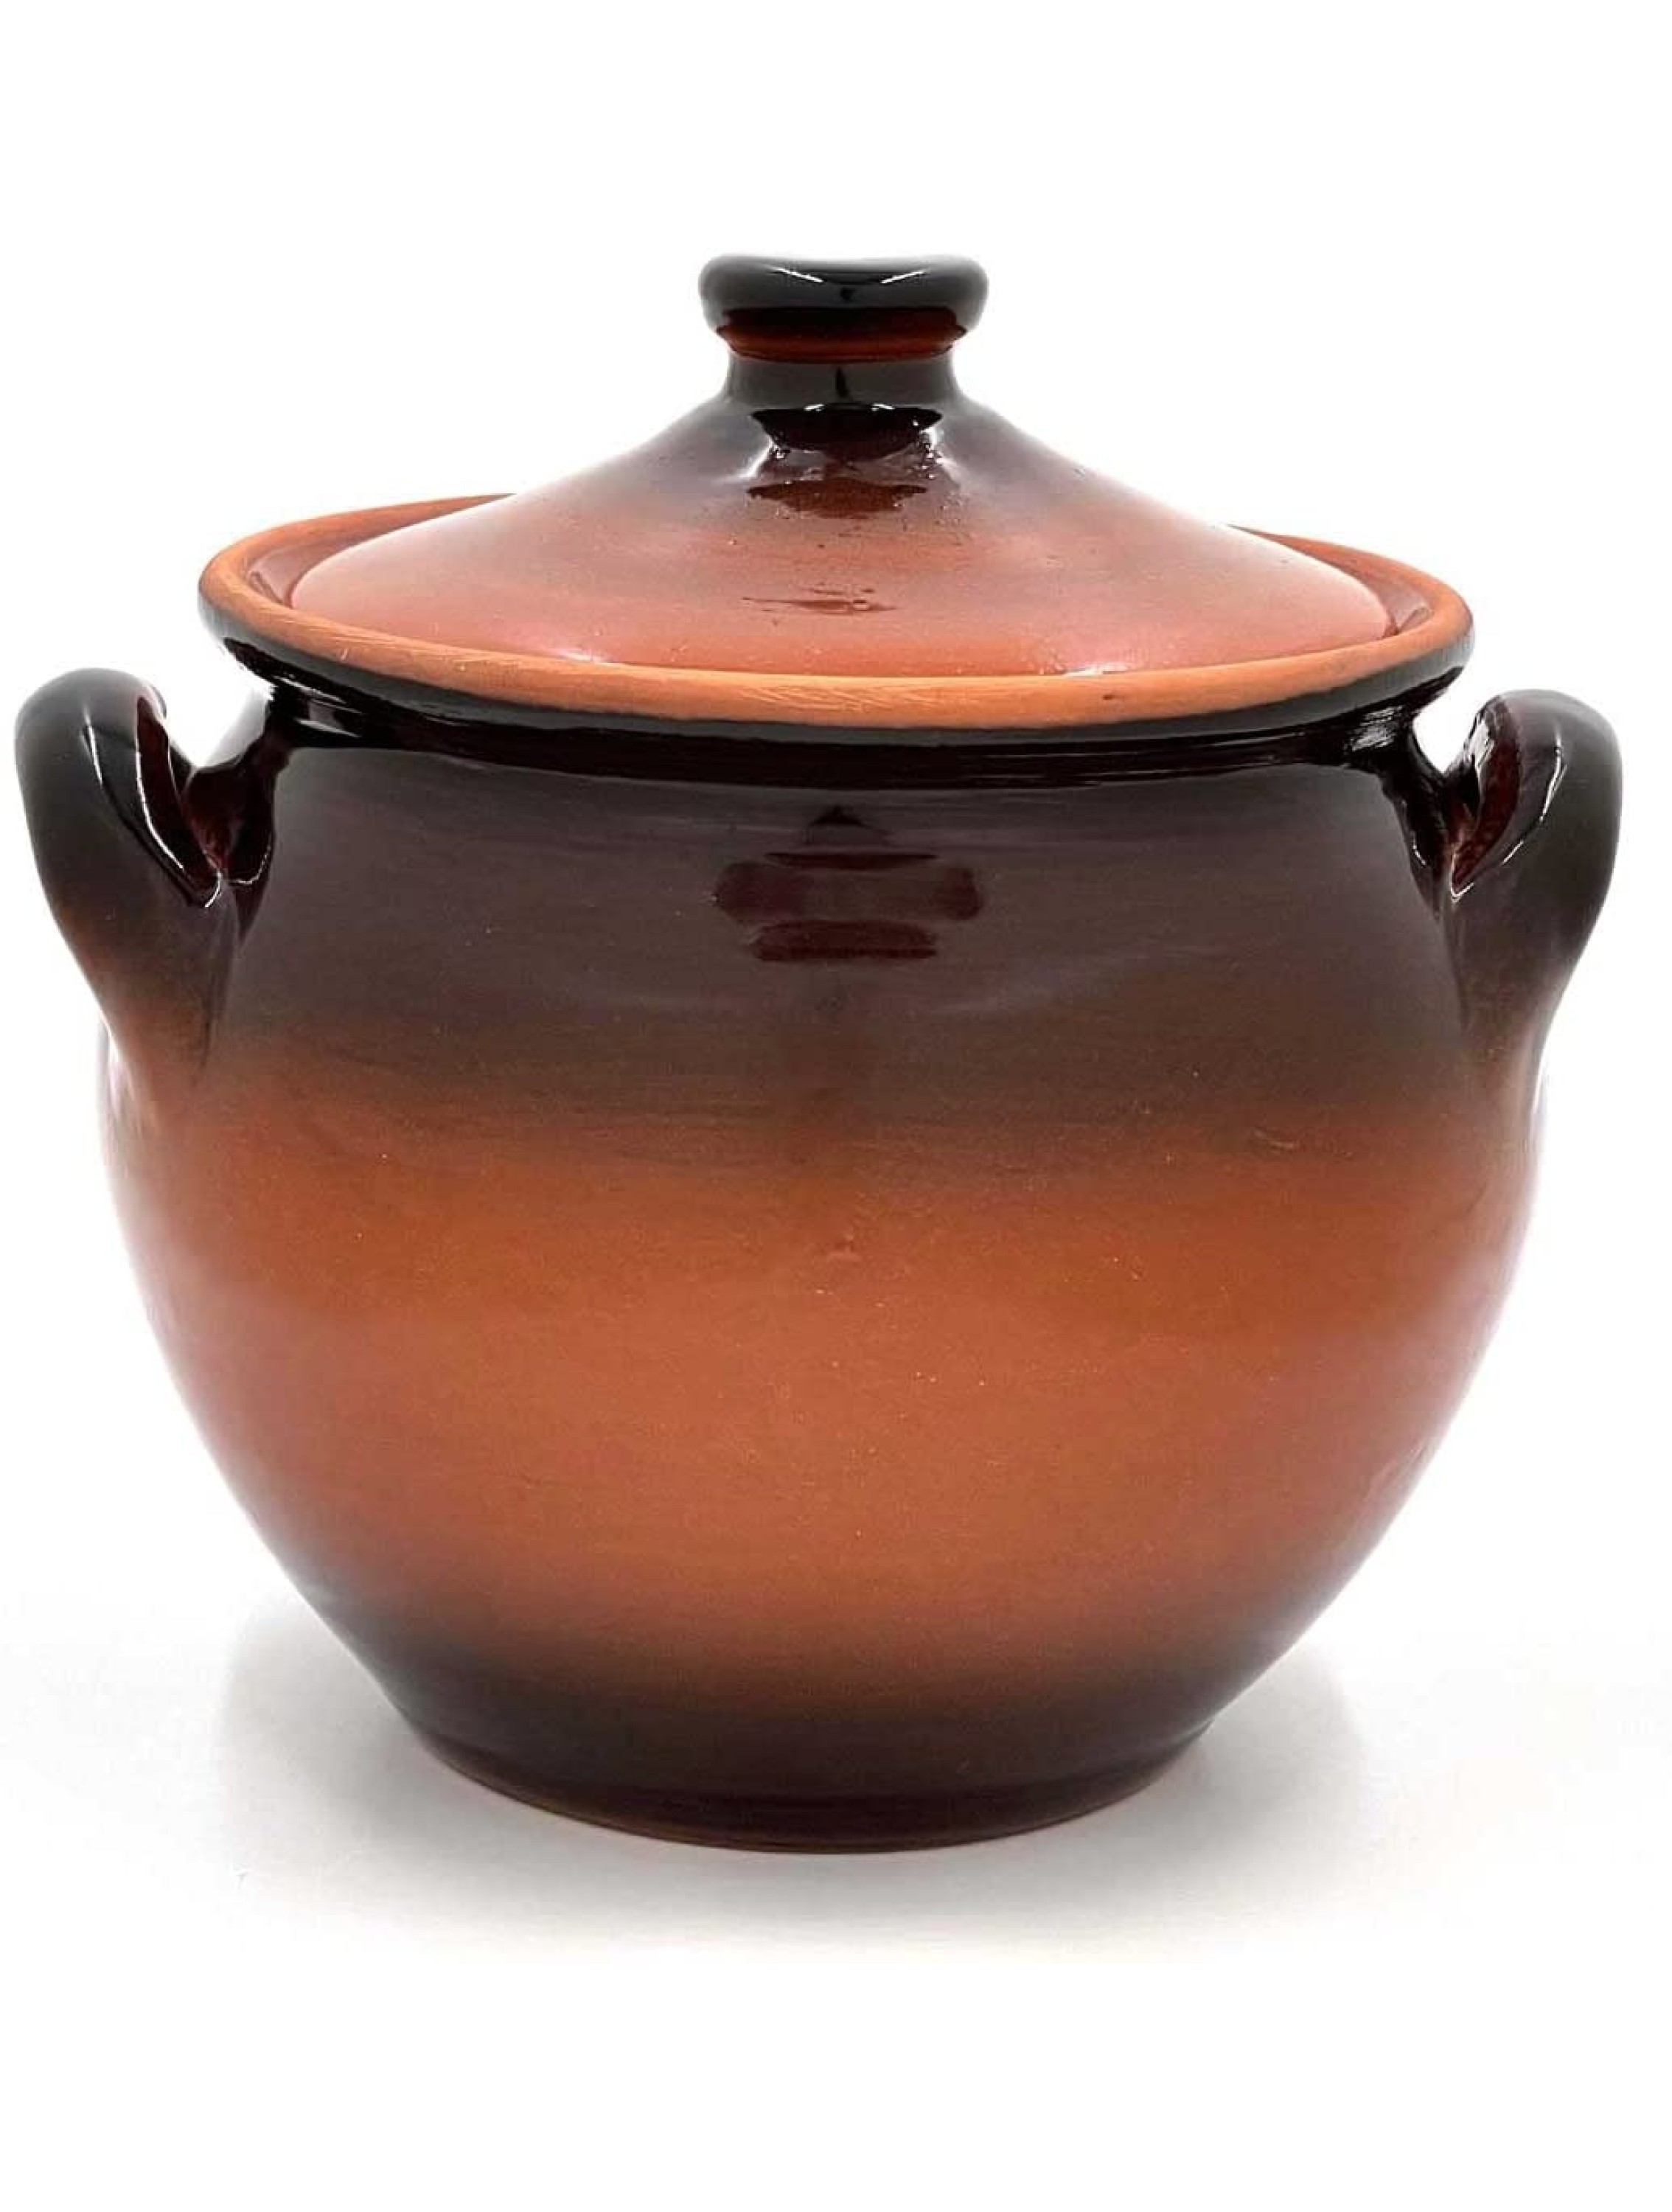 Clay Pot for Cooking Dutch Ovens Casserole Dish Vintage Rustic – 2.3Qt 2.2L Brown European Style 900F Oven Safe Dish Healthy Organic Gives Food a Unique Taste Backing Slow Cook for Meat 2.3 - BEXAG85UI